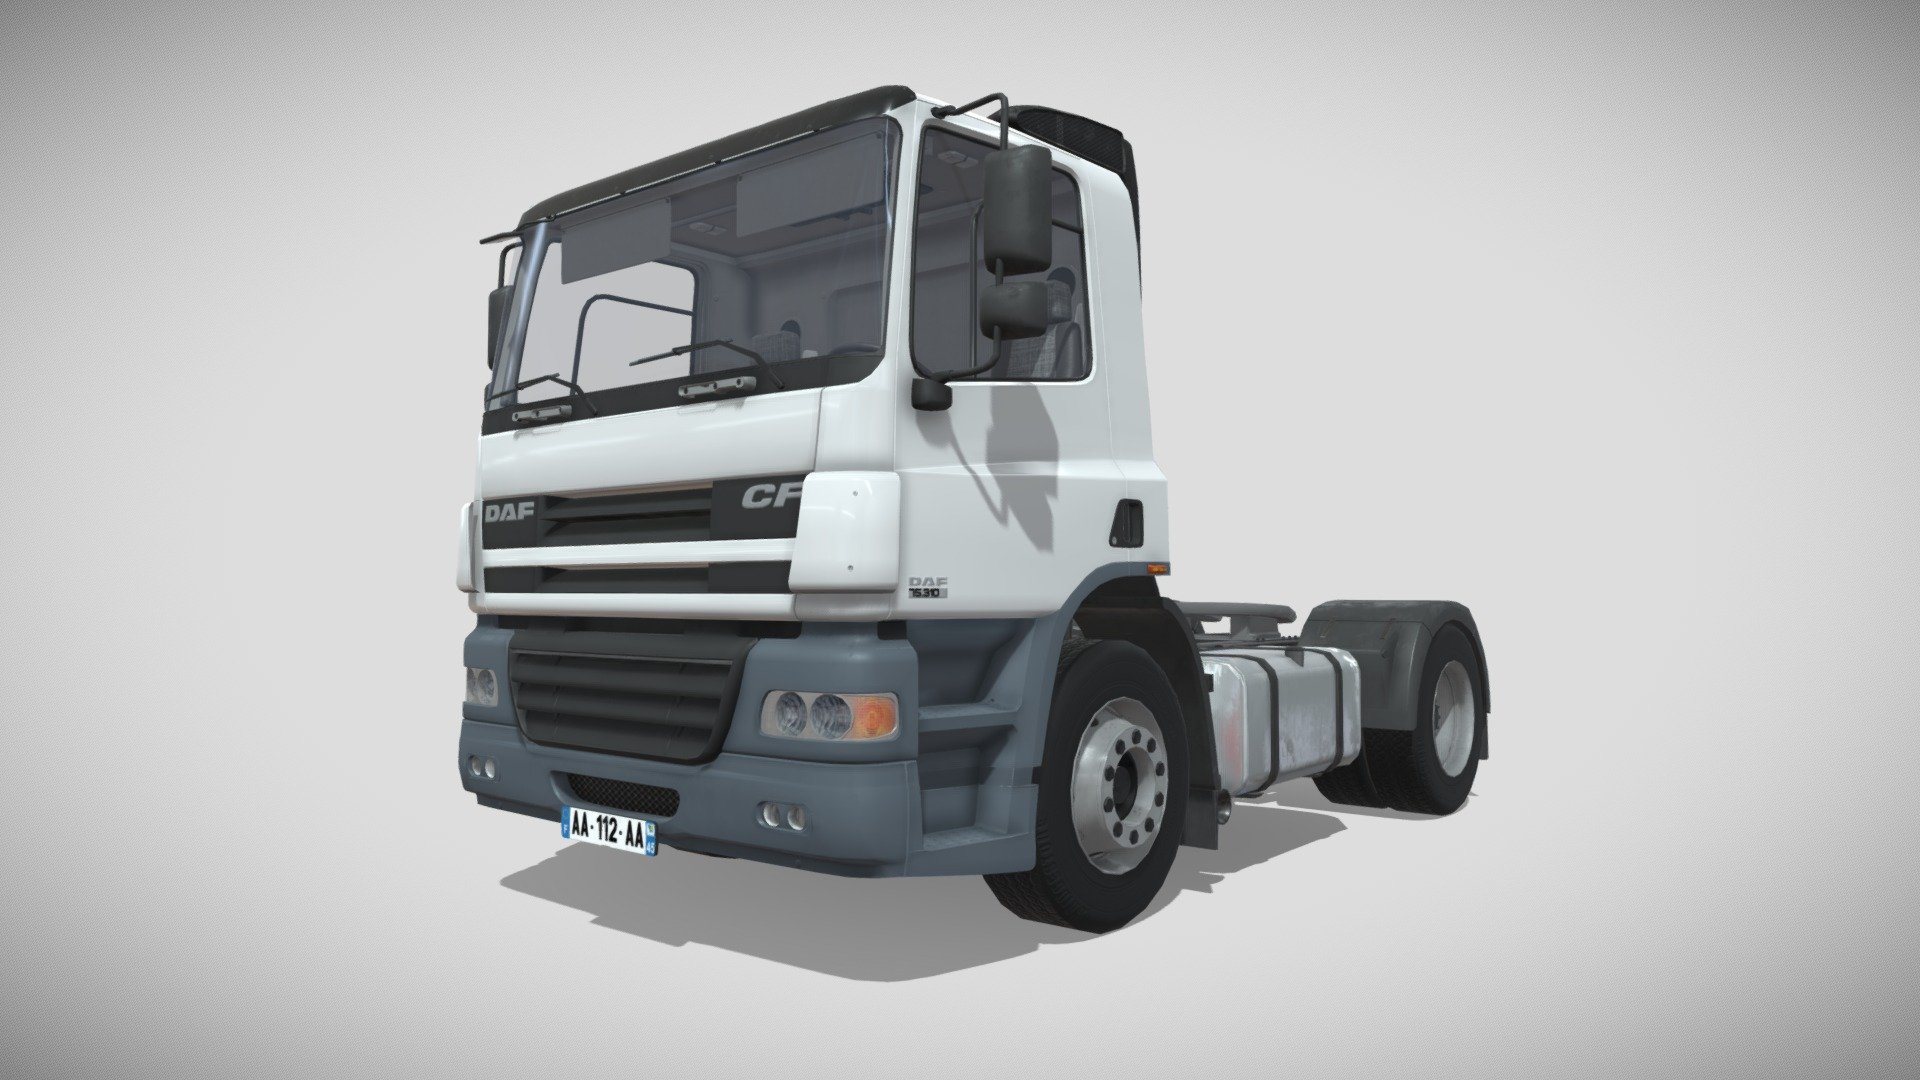 DAF CF 75.310 - Medium Poly Made on Cinema 4D Substance Painter and Photoshop. -&gt; 4K Texture ( Completely made by myself )  This model is not free of rights You must inform me of your usage. By Max - Contact Discord : Max#5532 - Truck DAF CF 75.310 - Download Free 3D model by Max (@Max-5532) 3d model